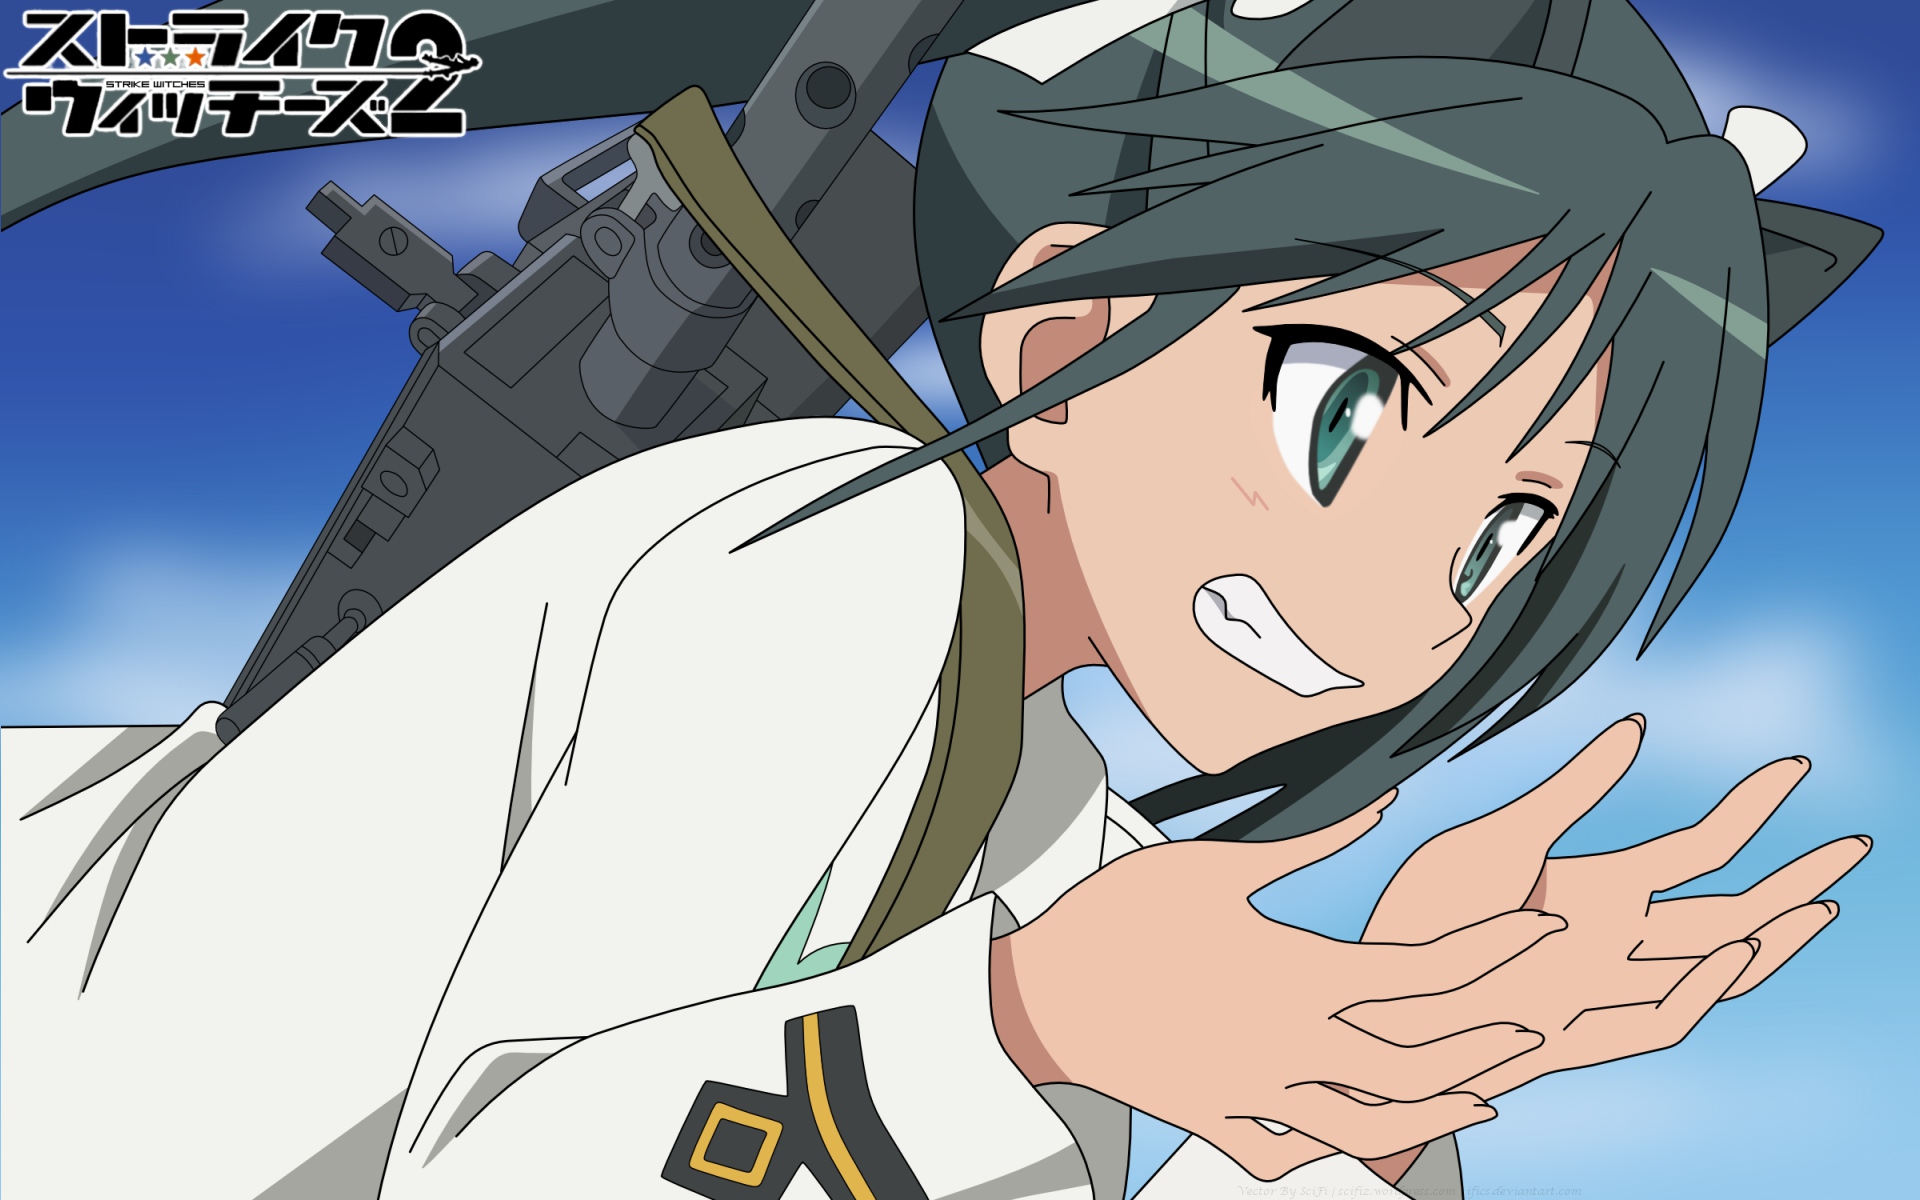 Strike Witches Wallpaper